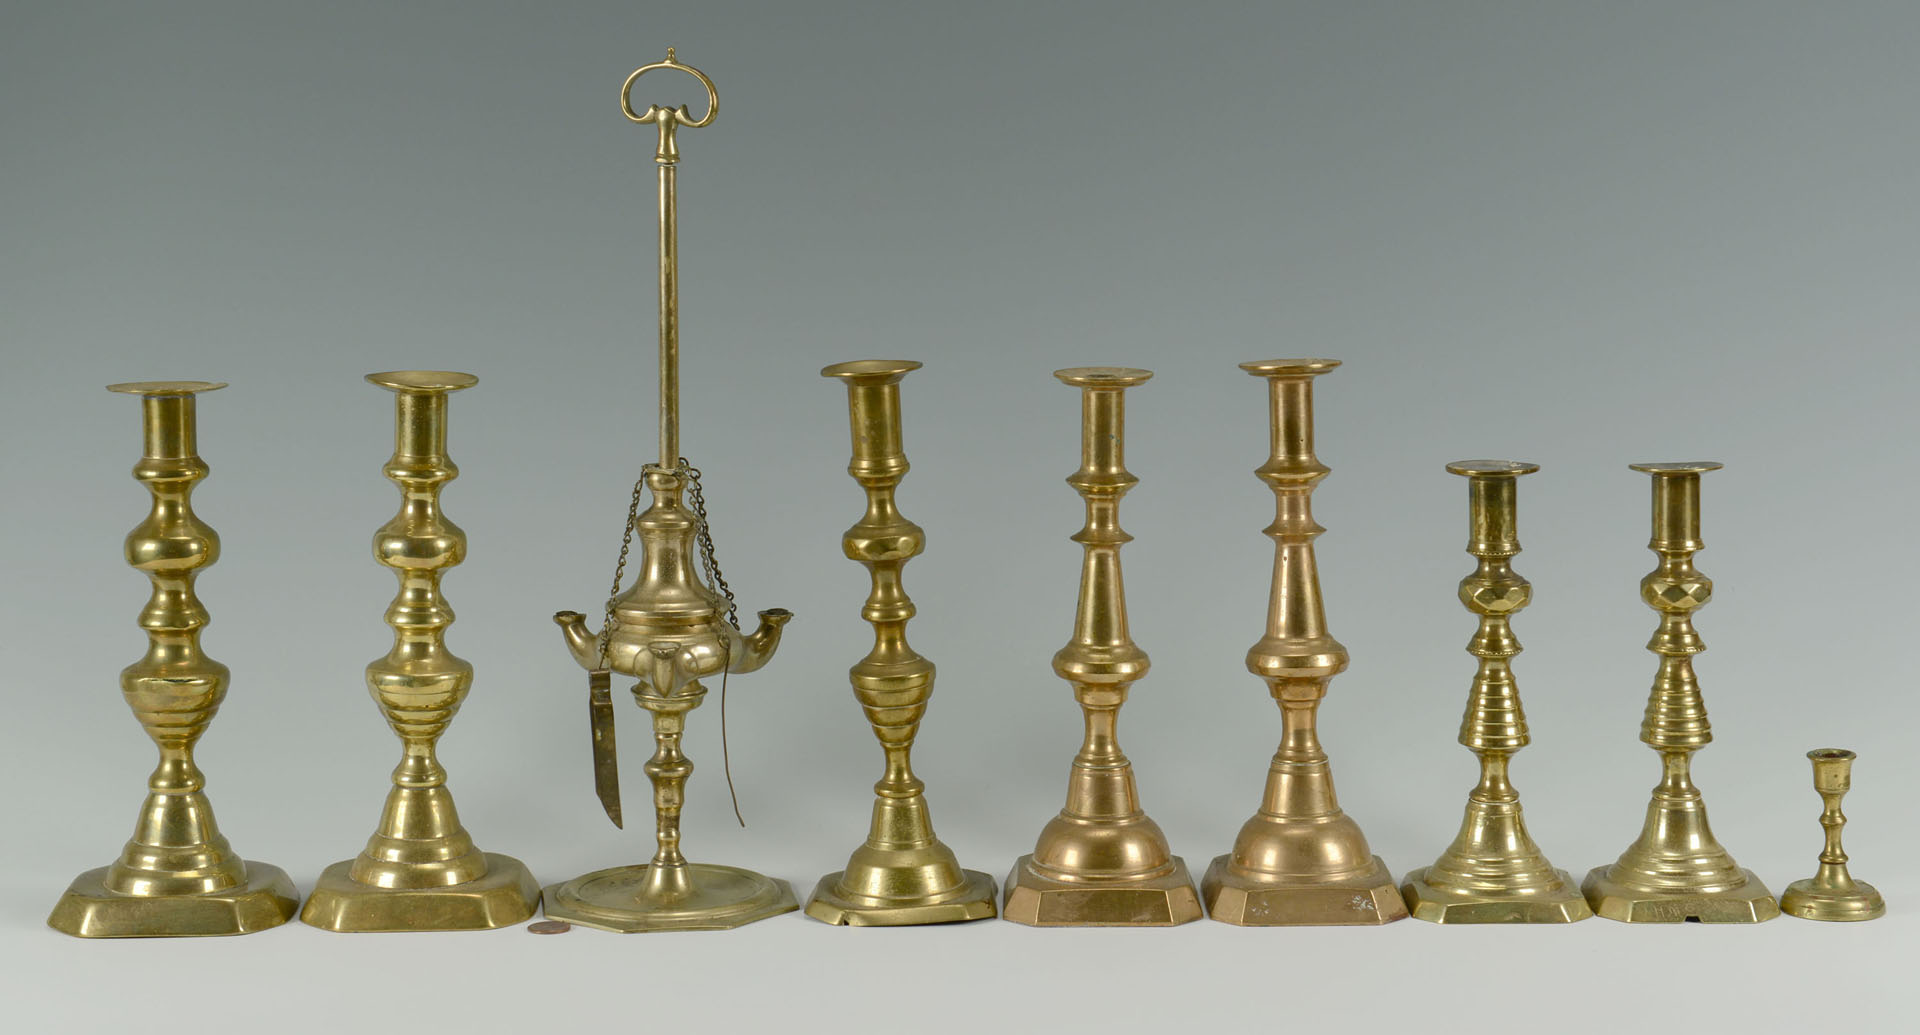 Lot 756: Grouping of Brass Candlesticks, 19th c.